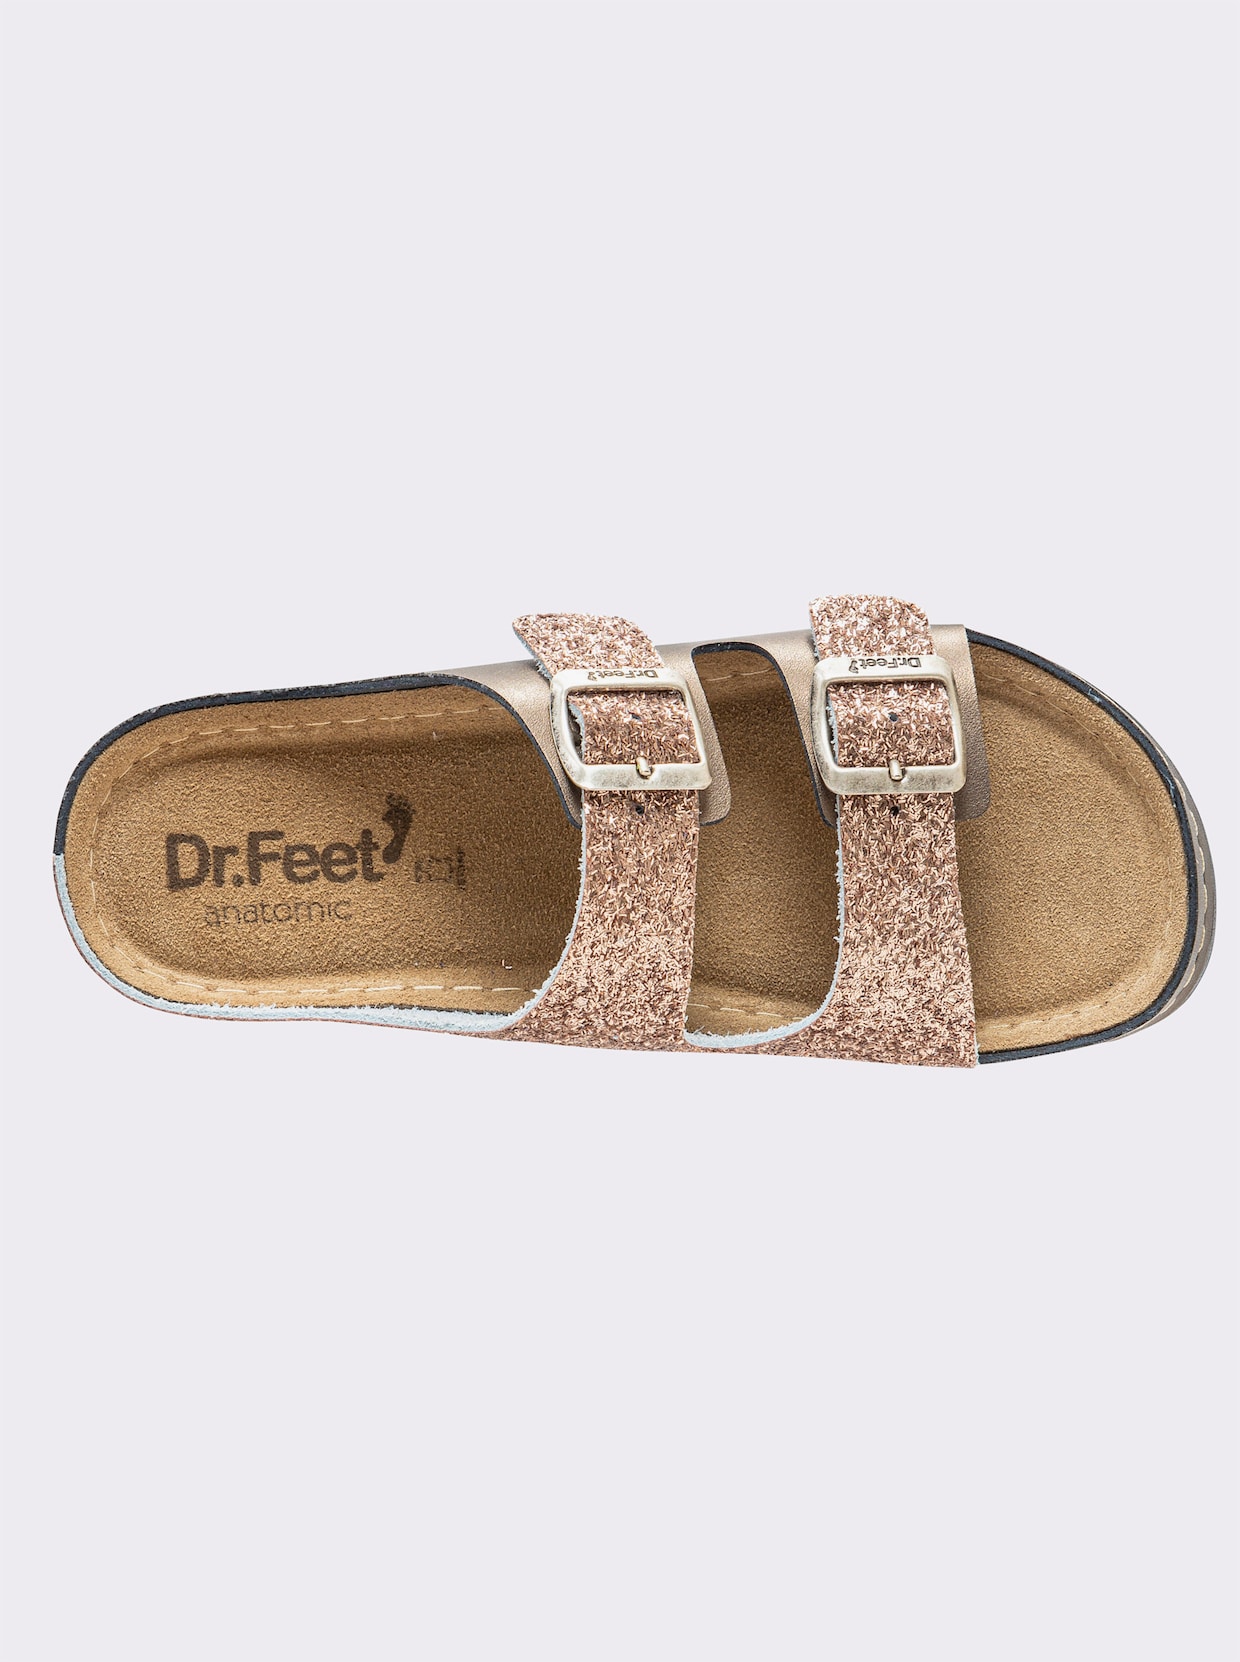 Dr. Feet Slippers - roos